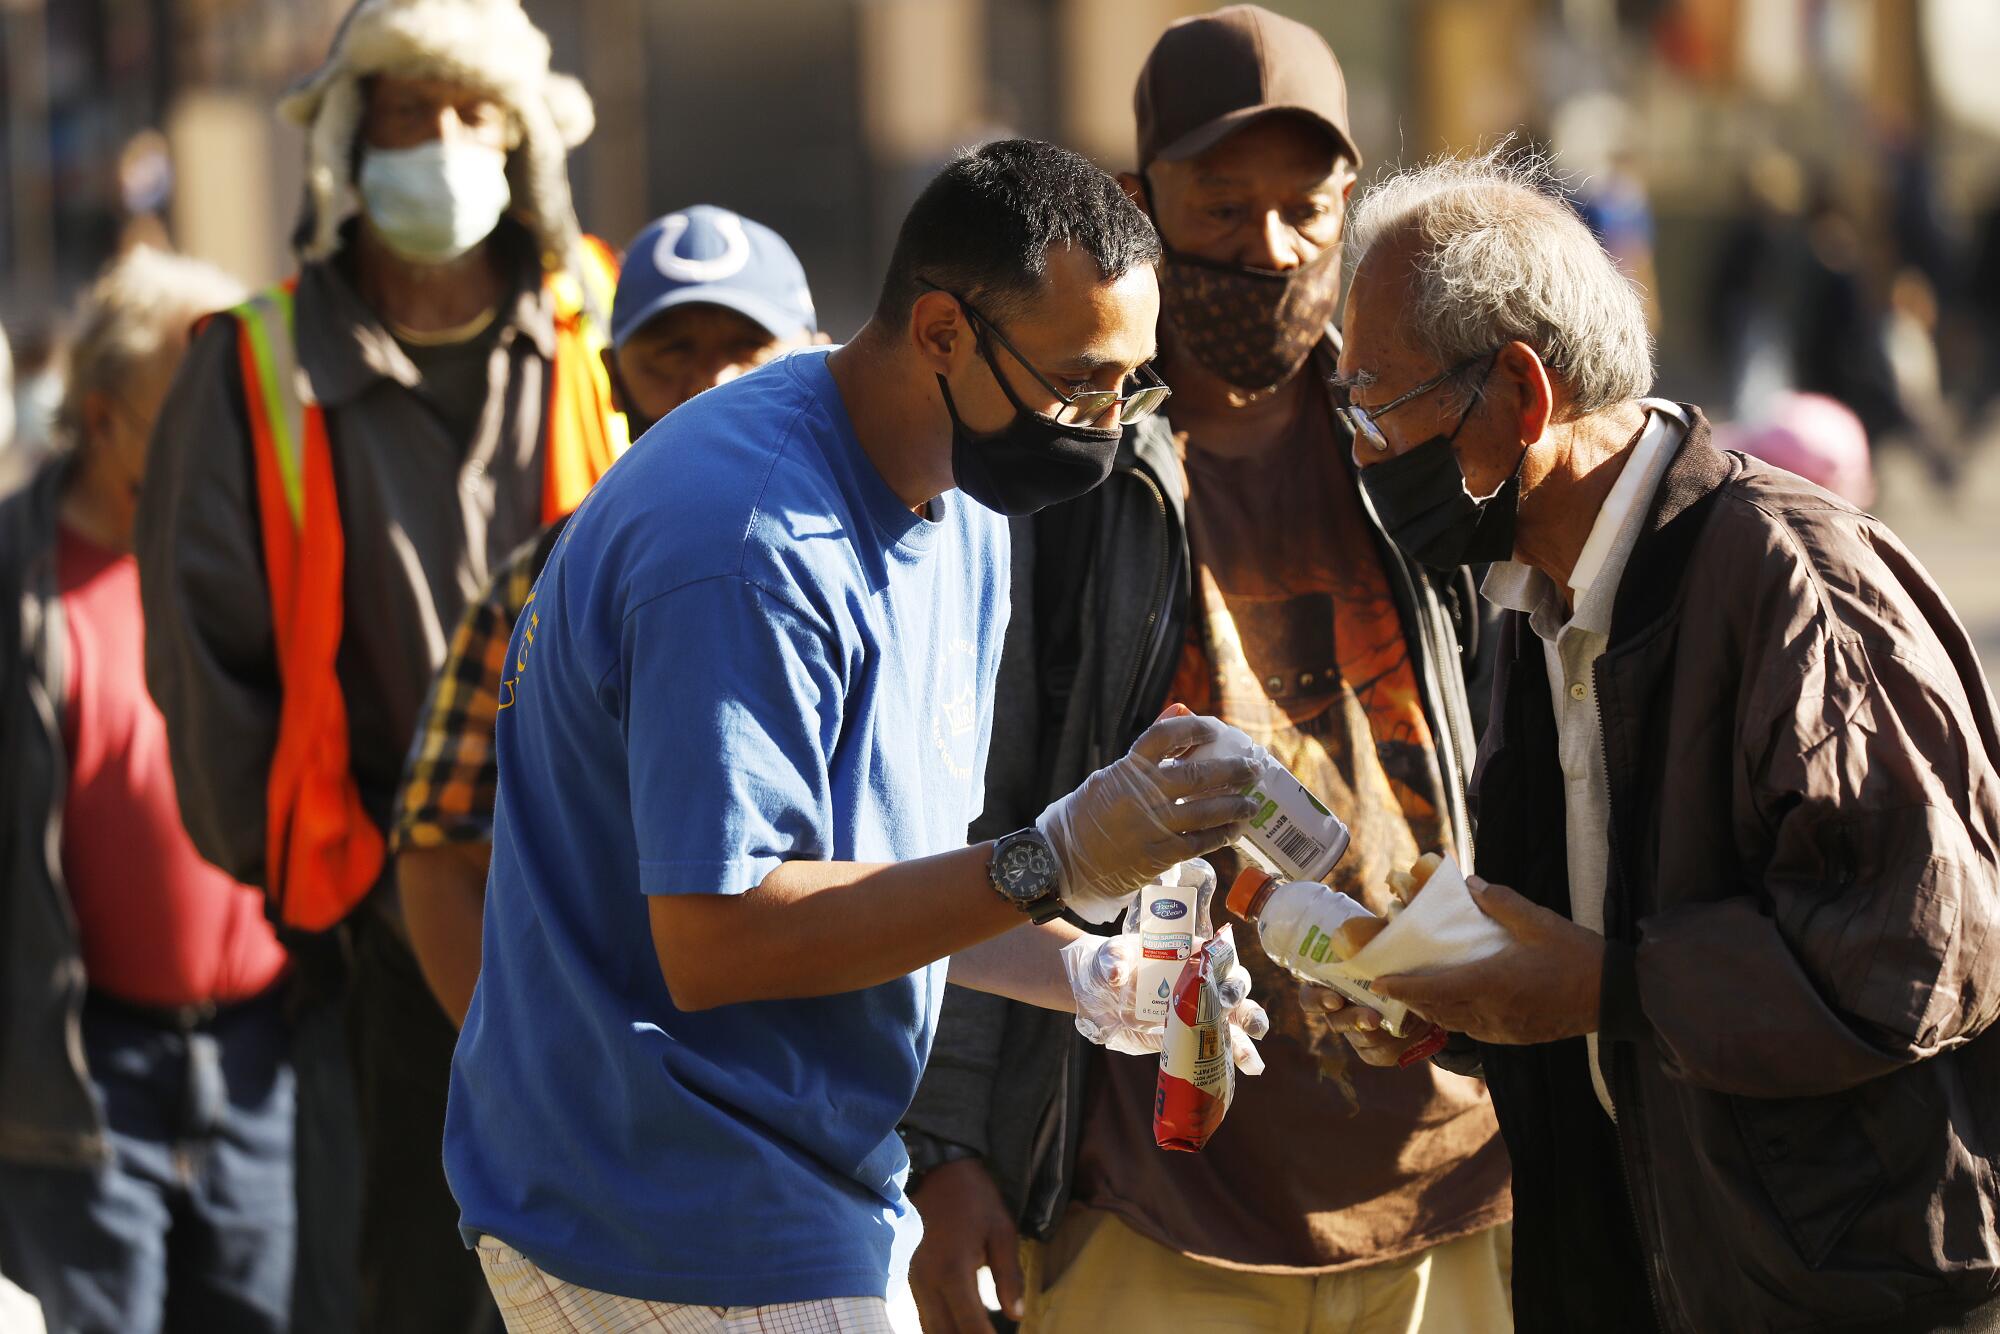 An elderly man receives food and drink from a masked volunteer in a line of people